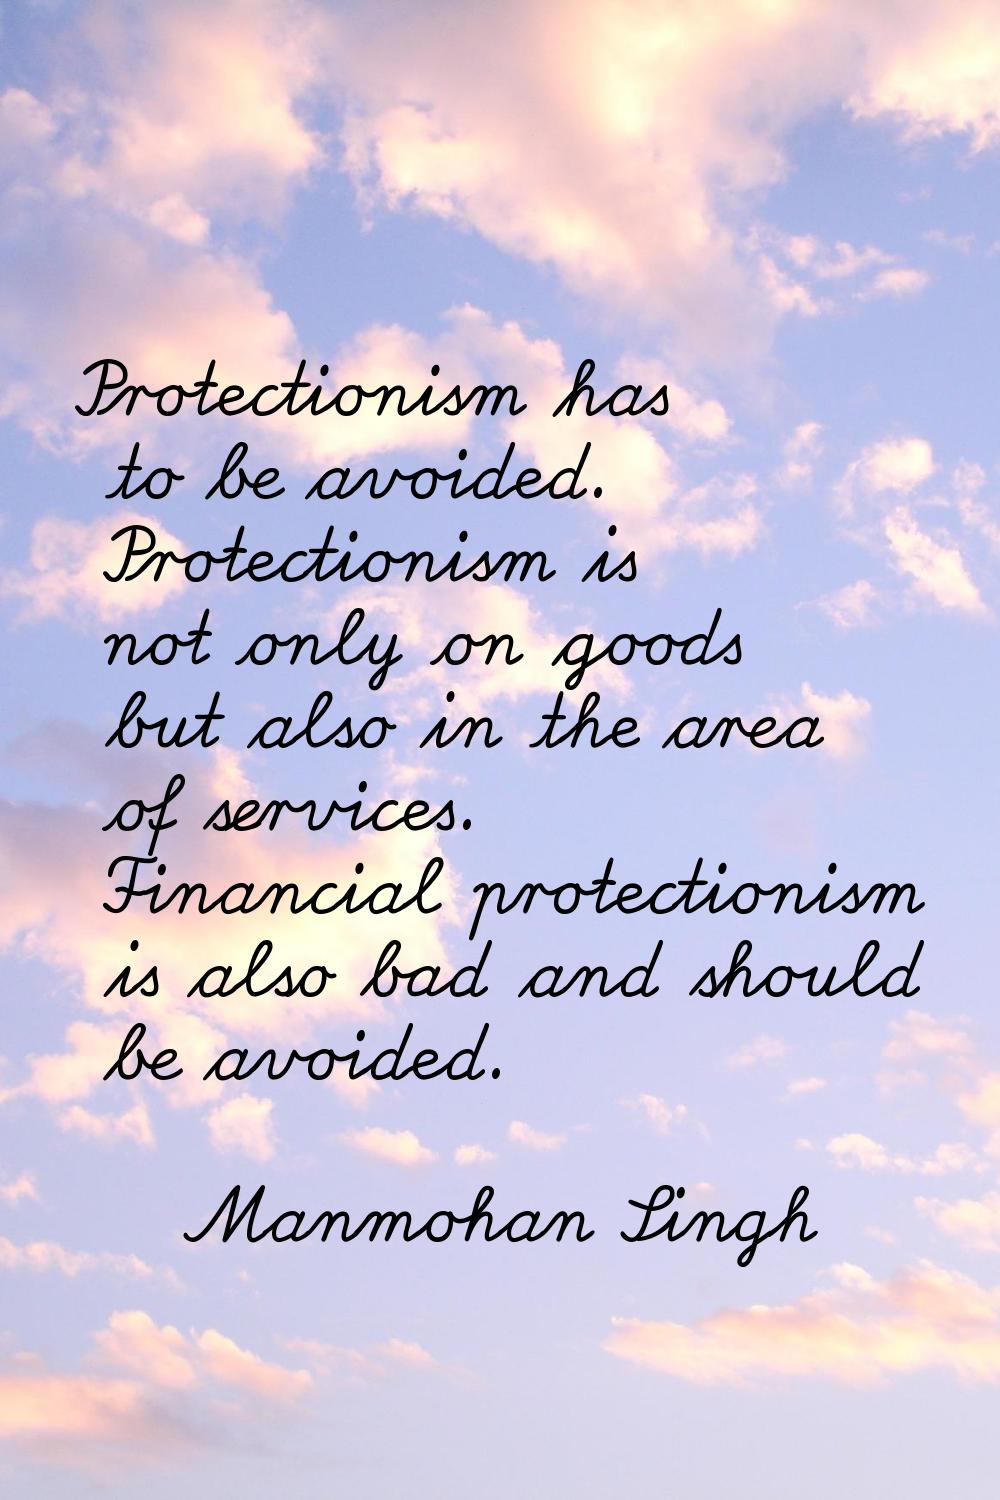 Protectionism has to be avoided. Protectionism is not only on goods but also in the area of service